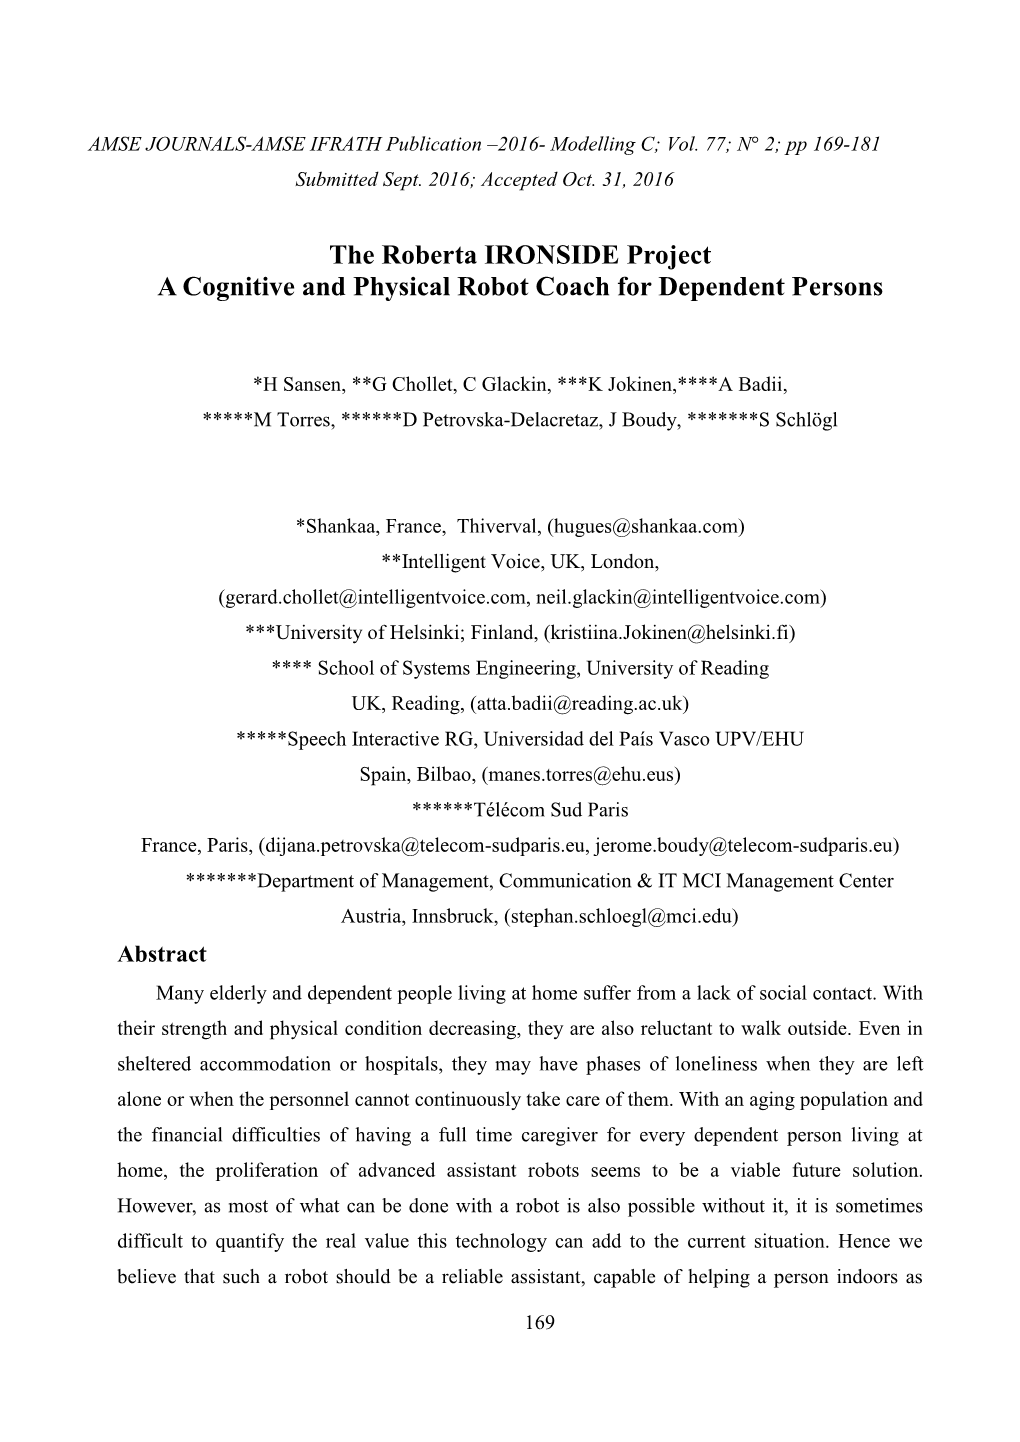 The Roberta IRONSIDE Project a Cognitive and Physical Robot Coach for Dependent Persons